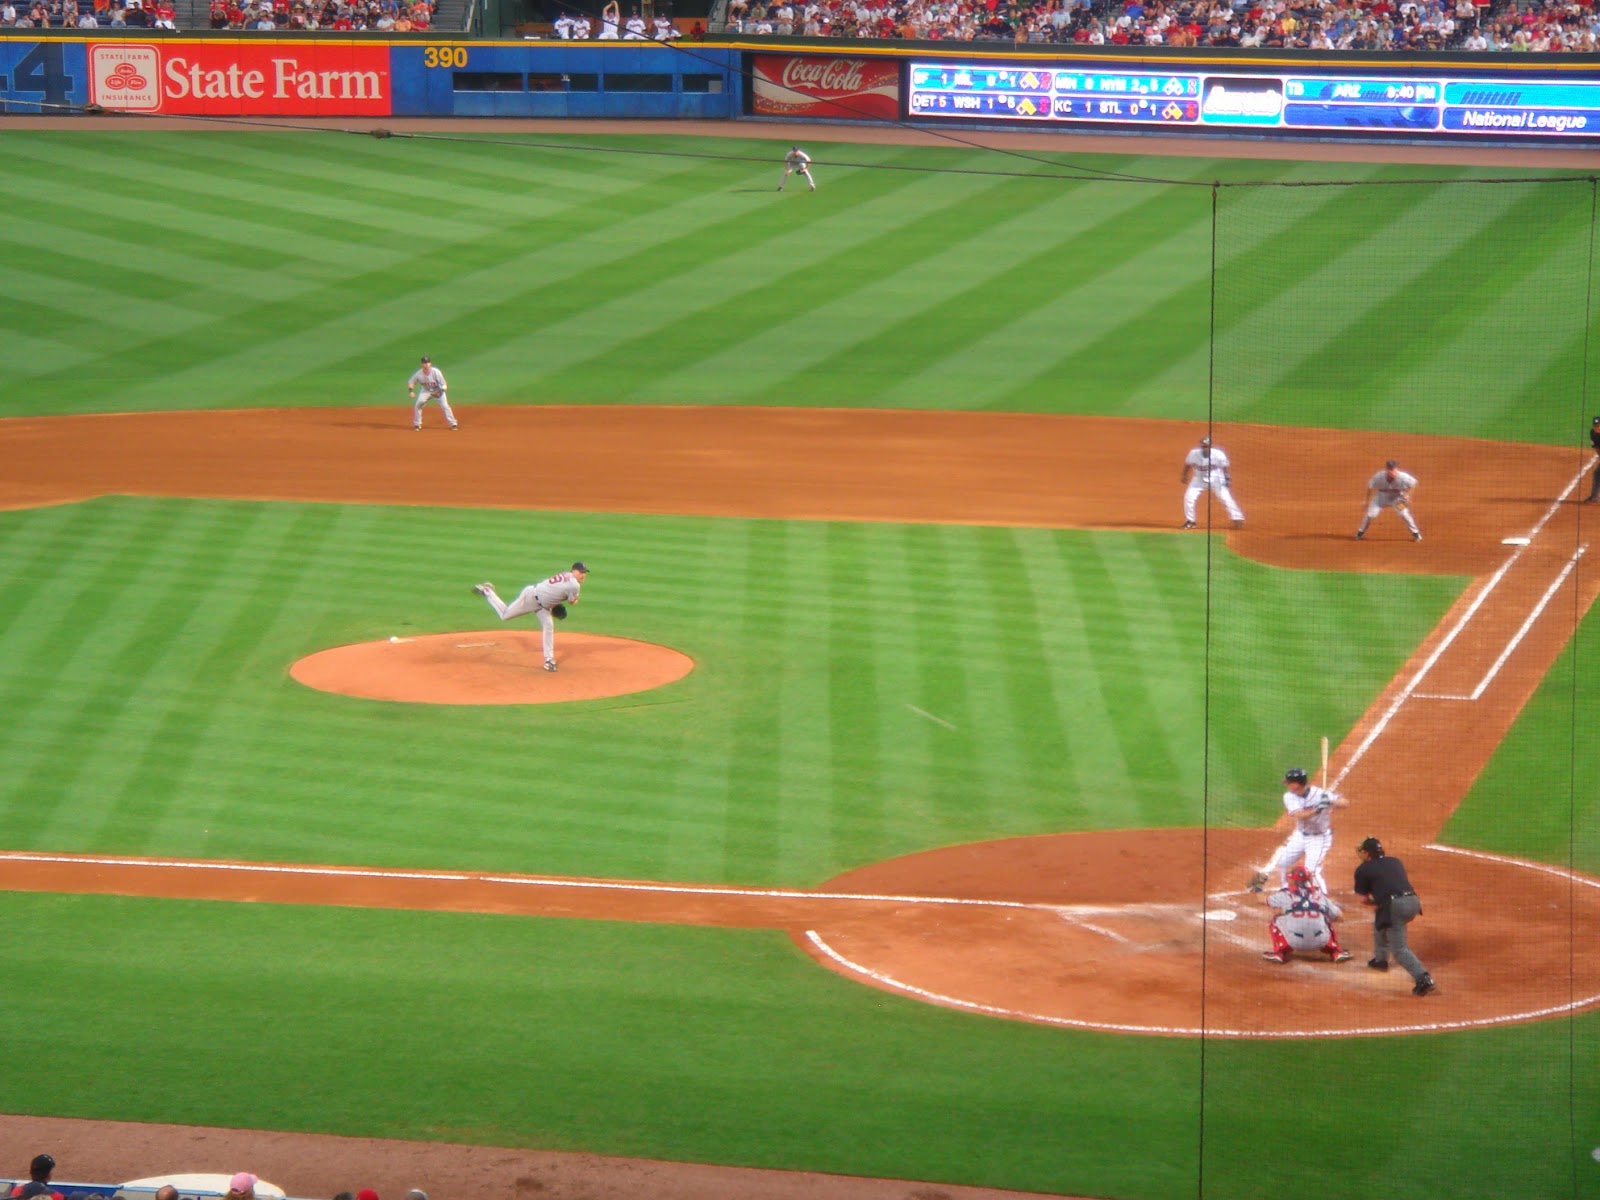 Braves vs. Red Sox at Turner Field, pitch, 2007